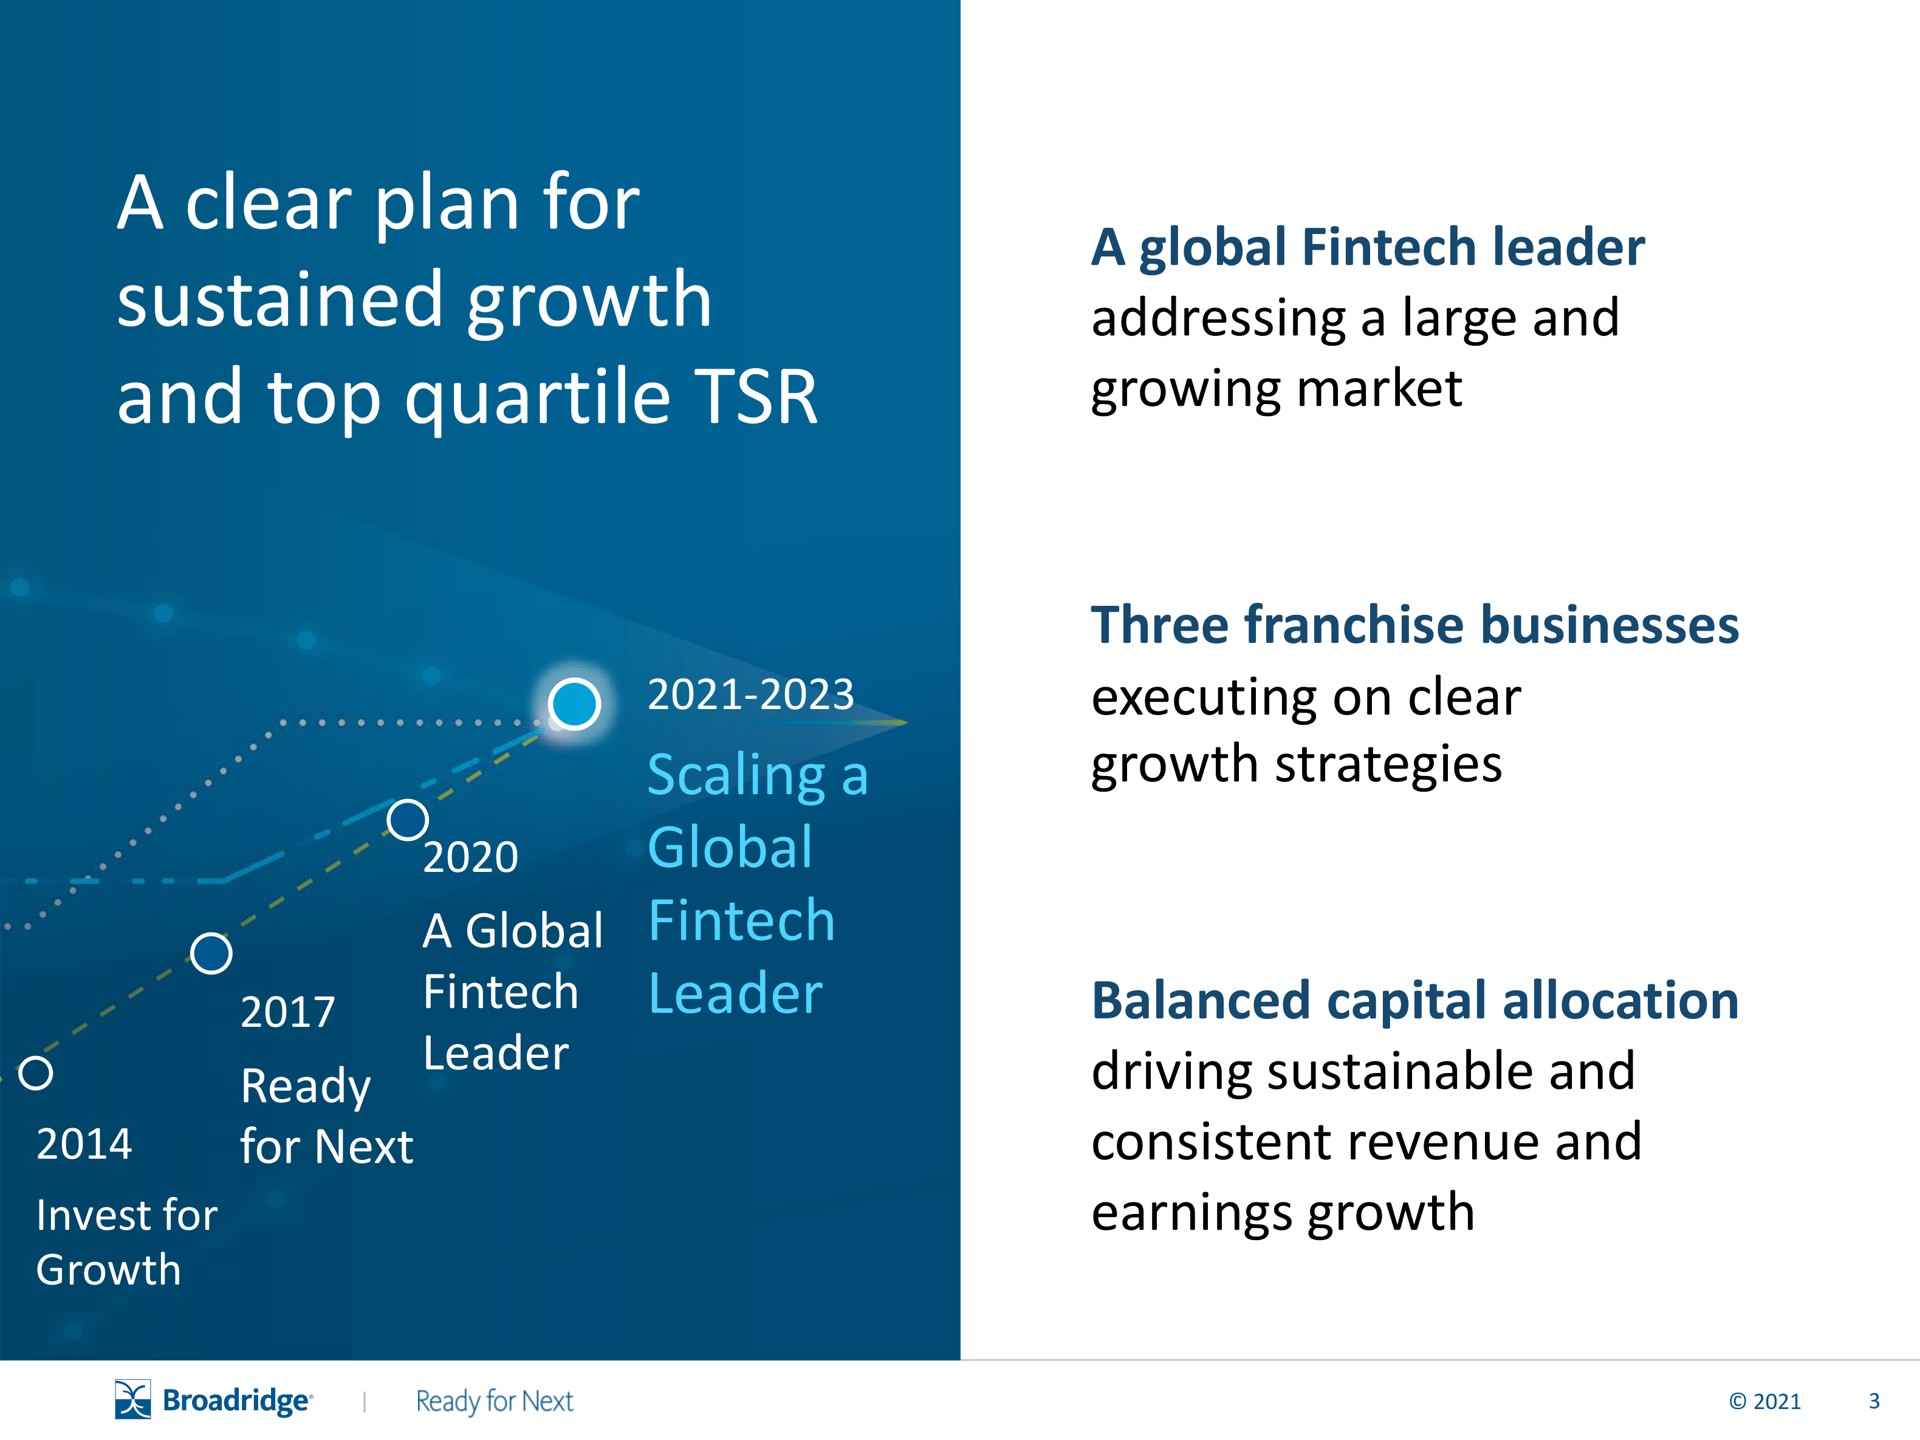 a clear plan for sustained growth and top quartile a global leader addressing a large and growing market scaling a global leader three franchise businesses executing on clear growth strategies balanced capital allocation driving sustainable and consistent revenue and earnings growth sere alee all cee next invest | Broadridge Financial Solutions